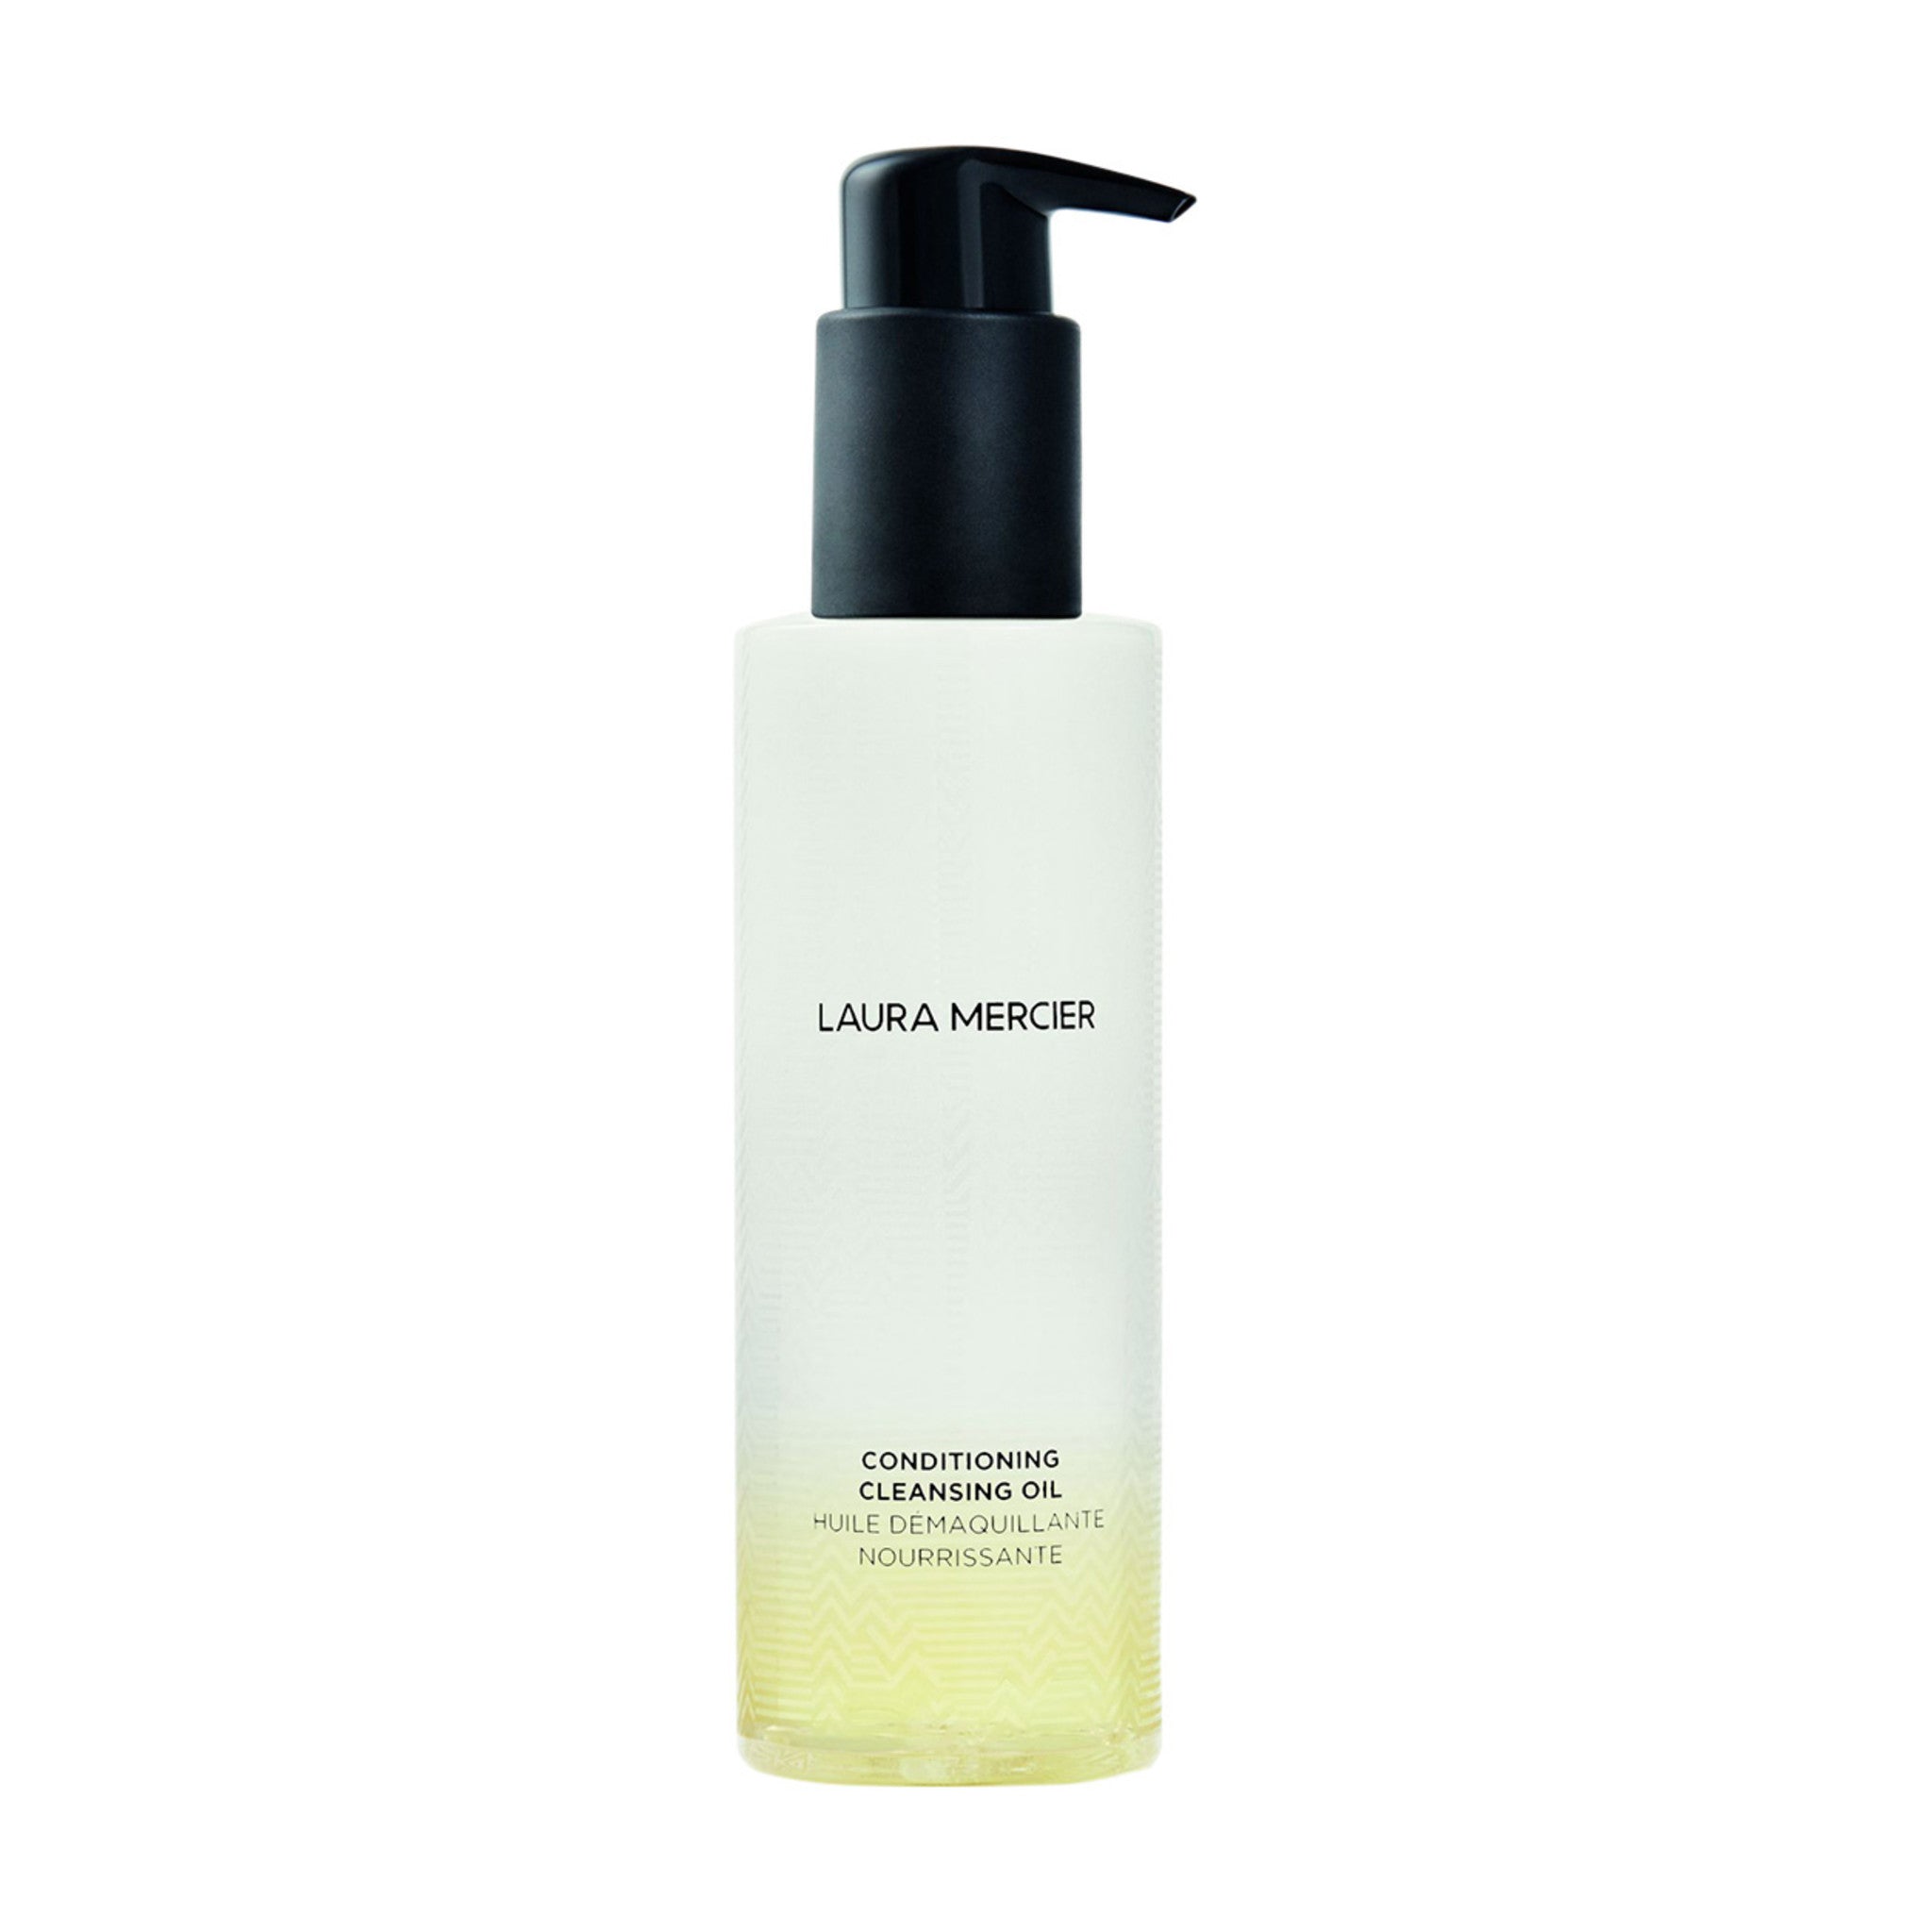 Laura Mercier Conditioning Cleansing Oil main image.